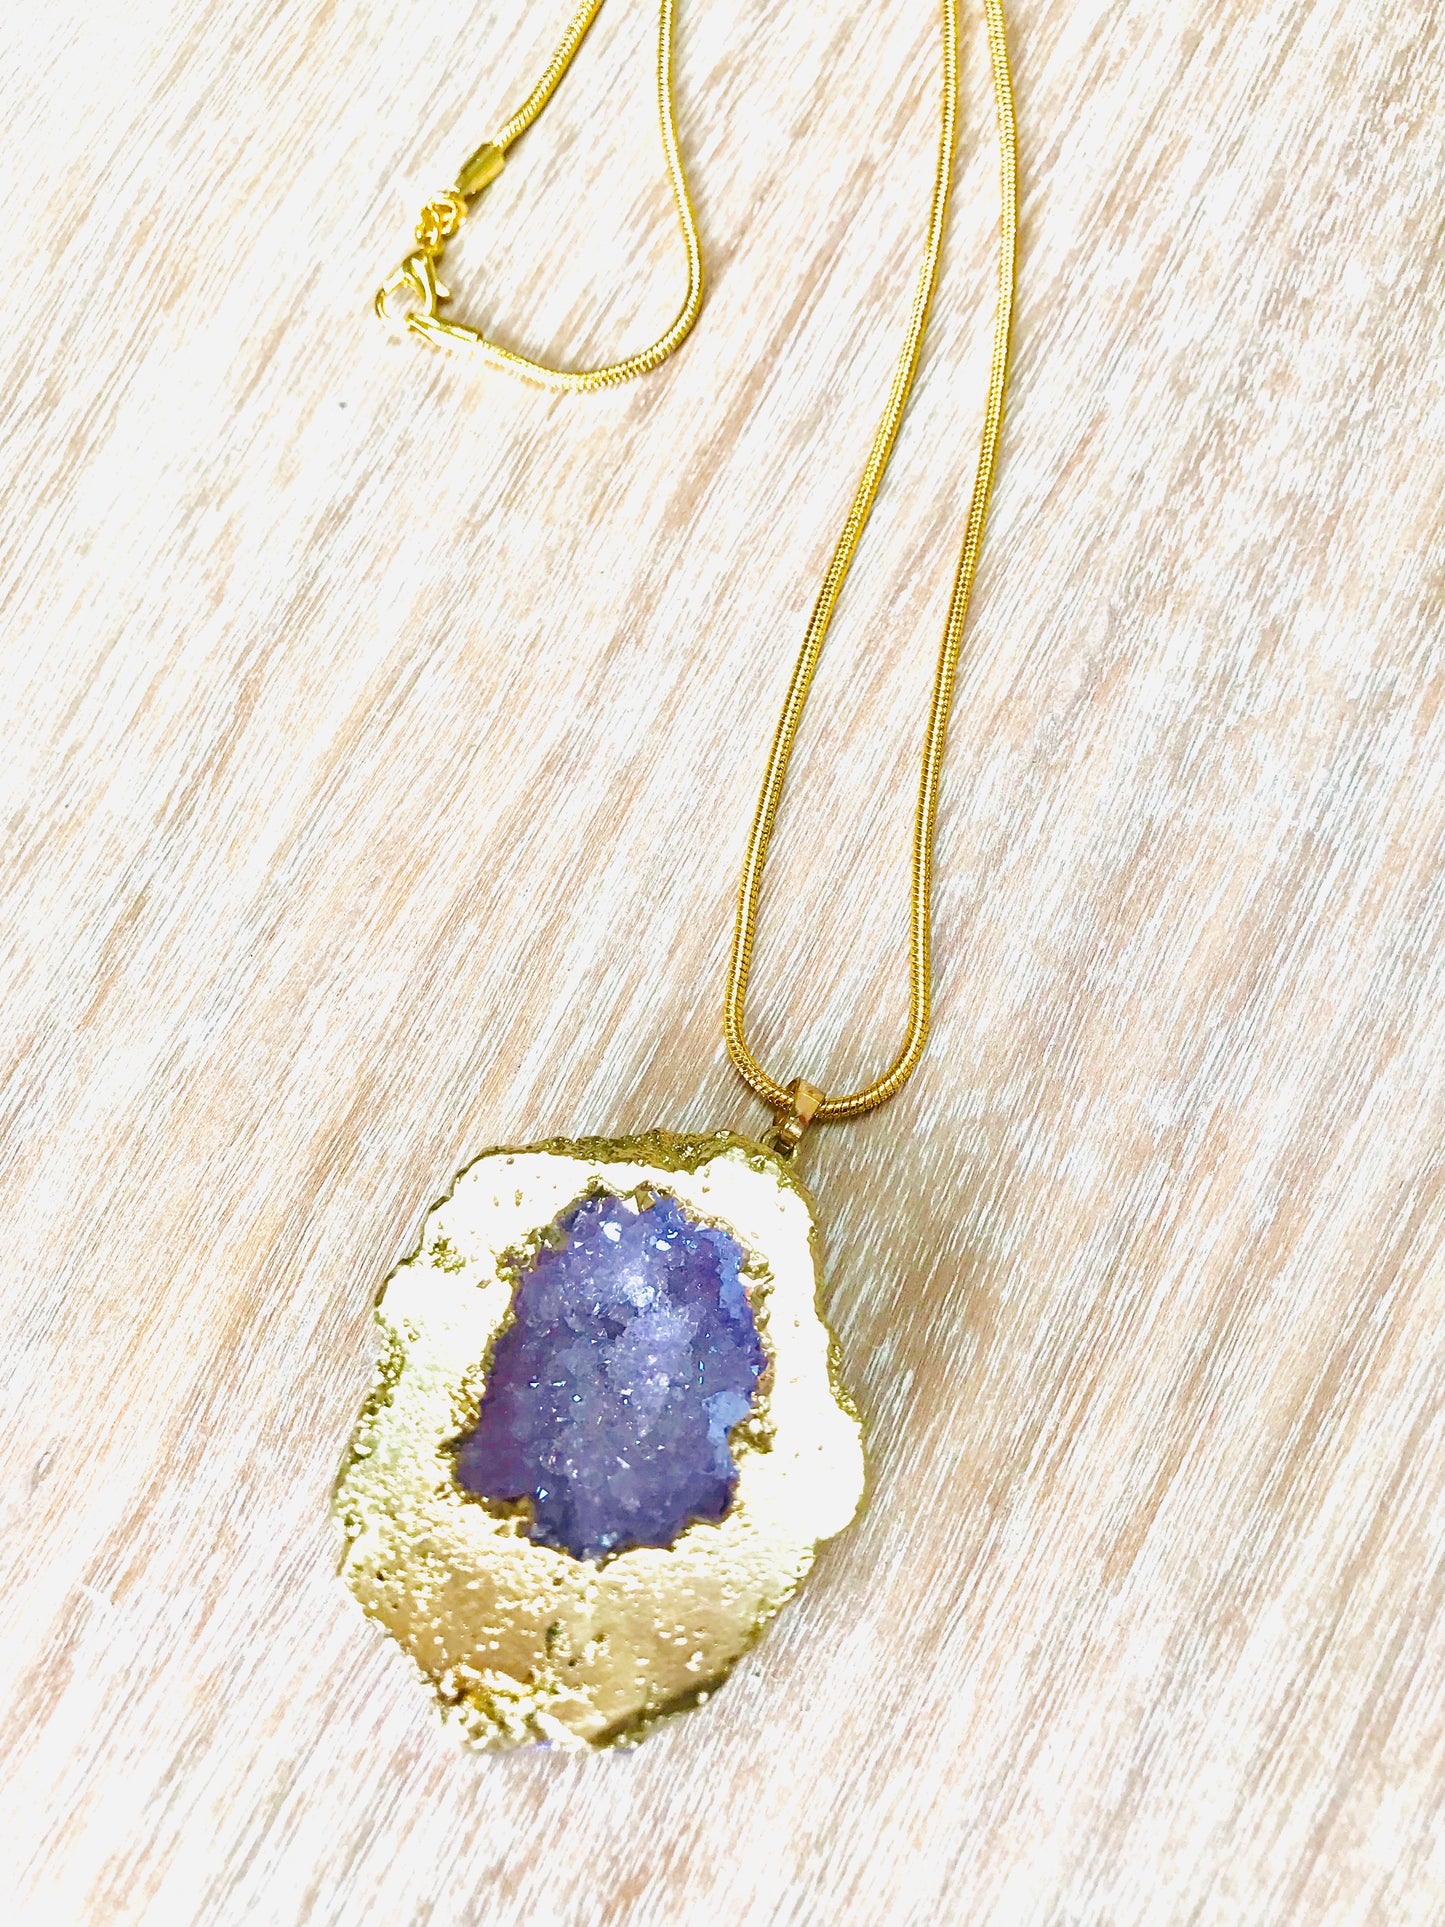 Druzy Crystal Healing Quartz Pendant & Gold Plated Rolo Necklace - Lilac - Crystal Boutique.co.uk 